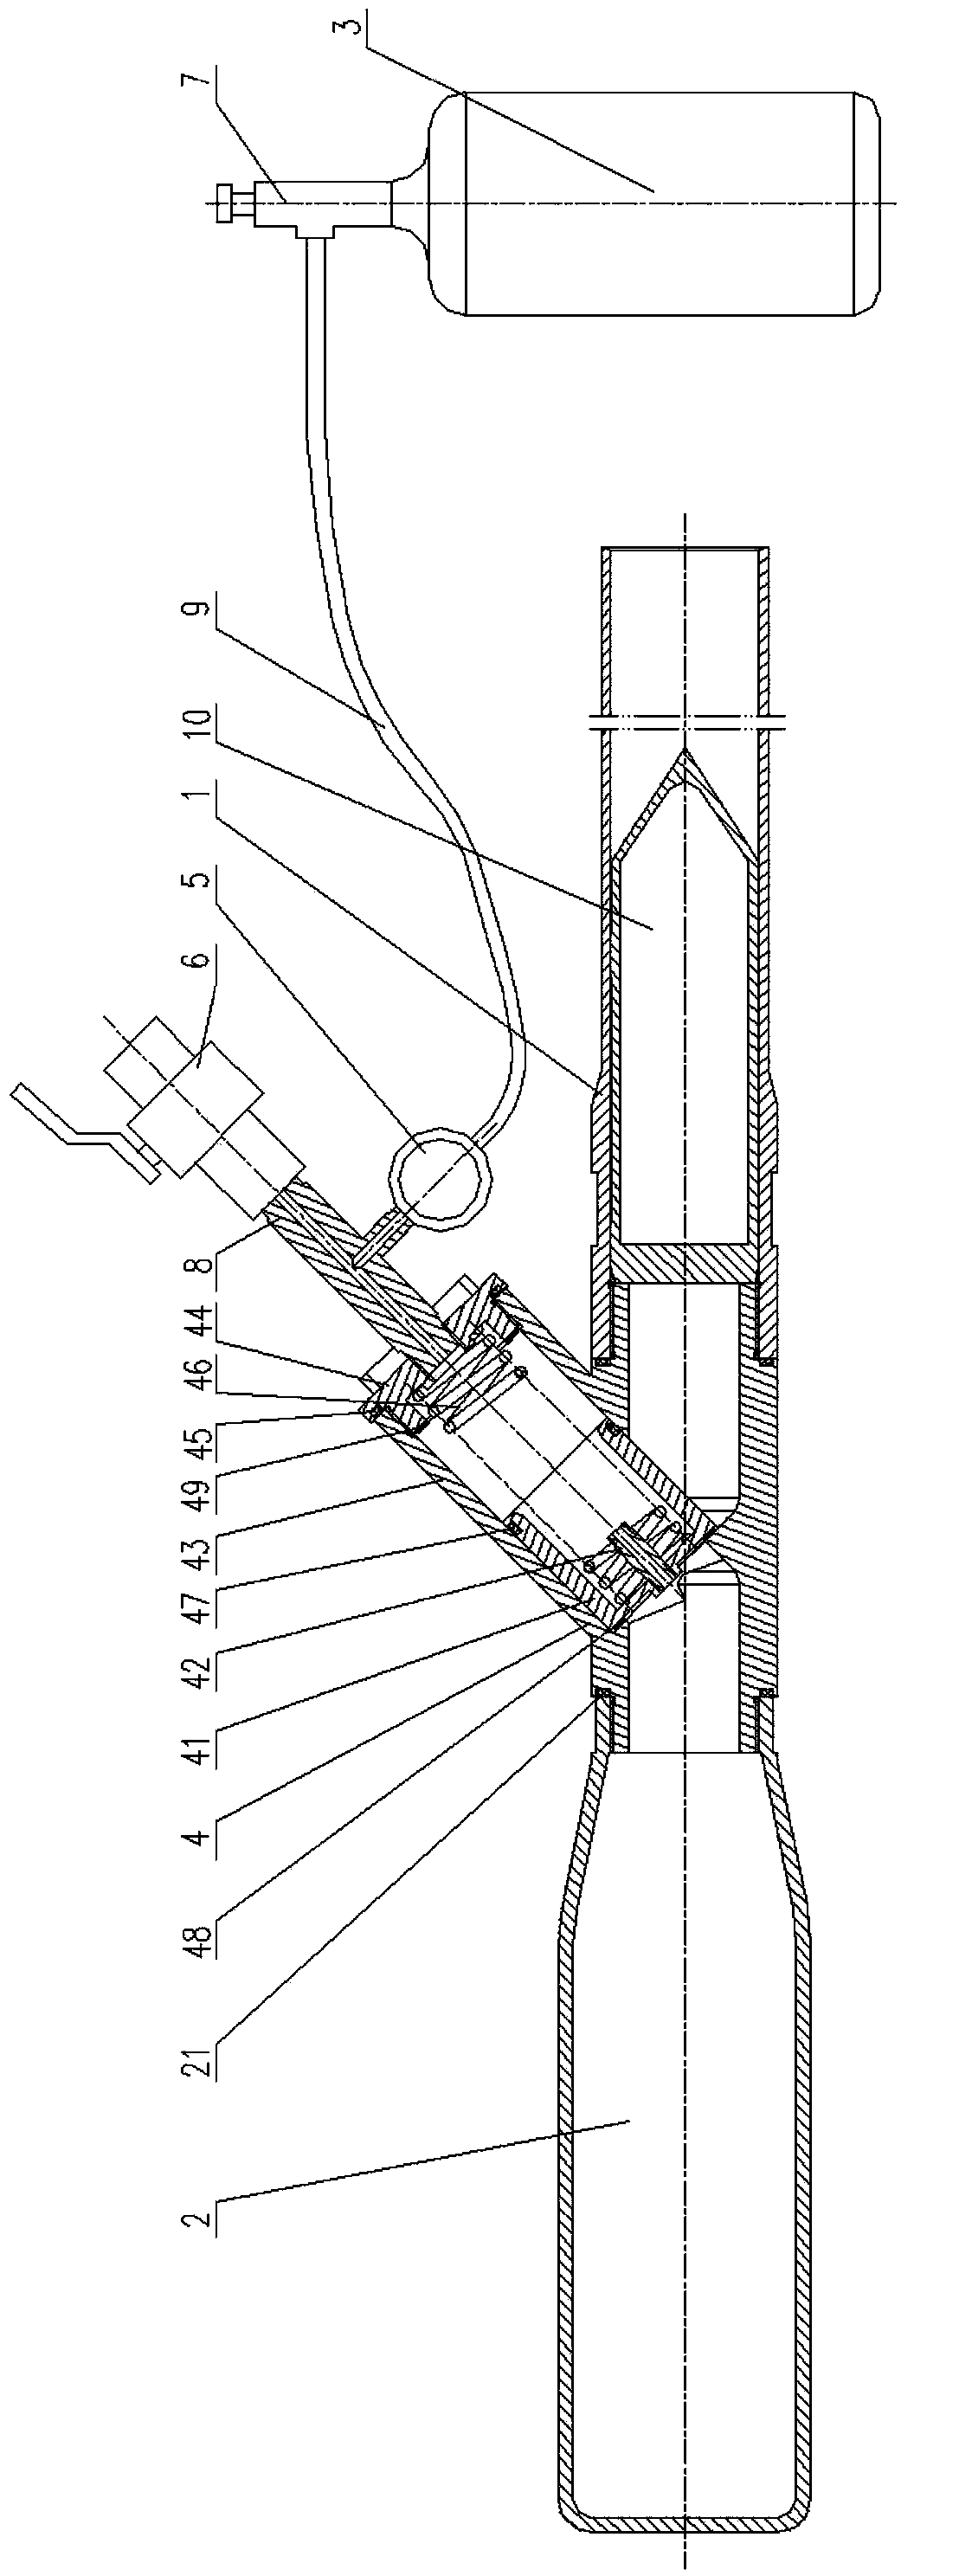 Pneumatic launcher with novel gas way system